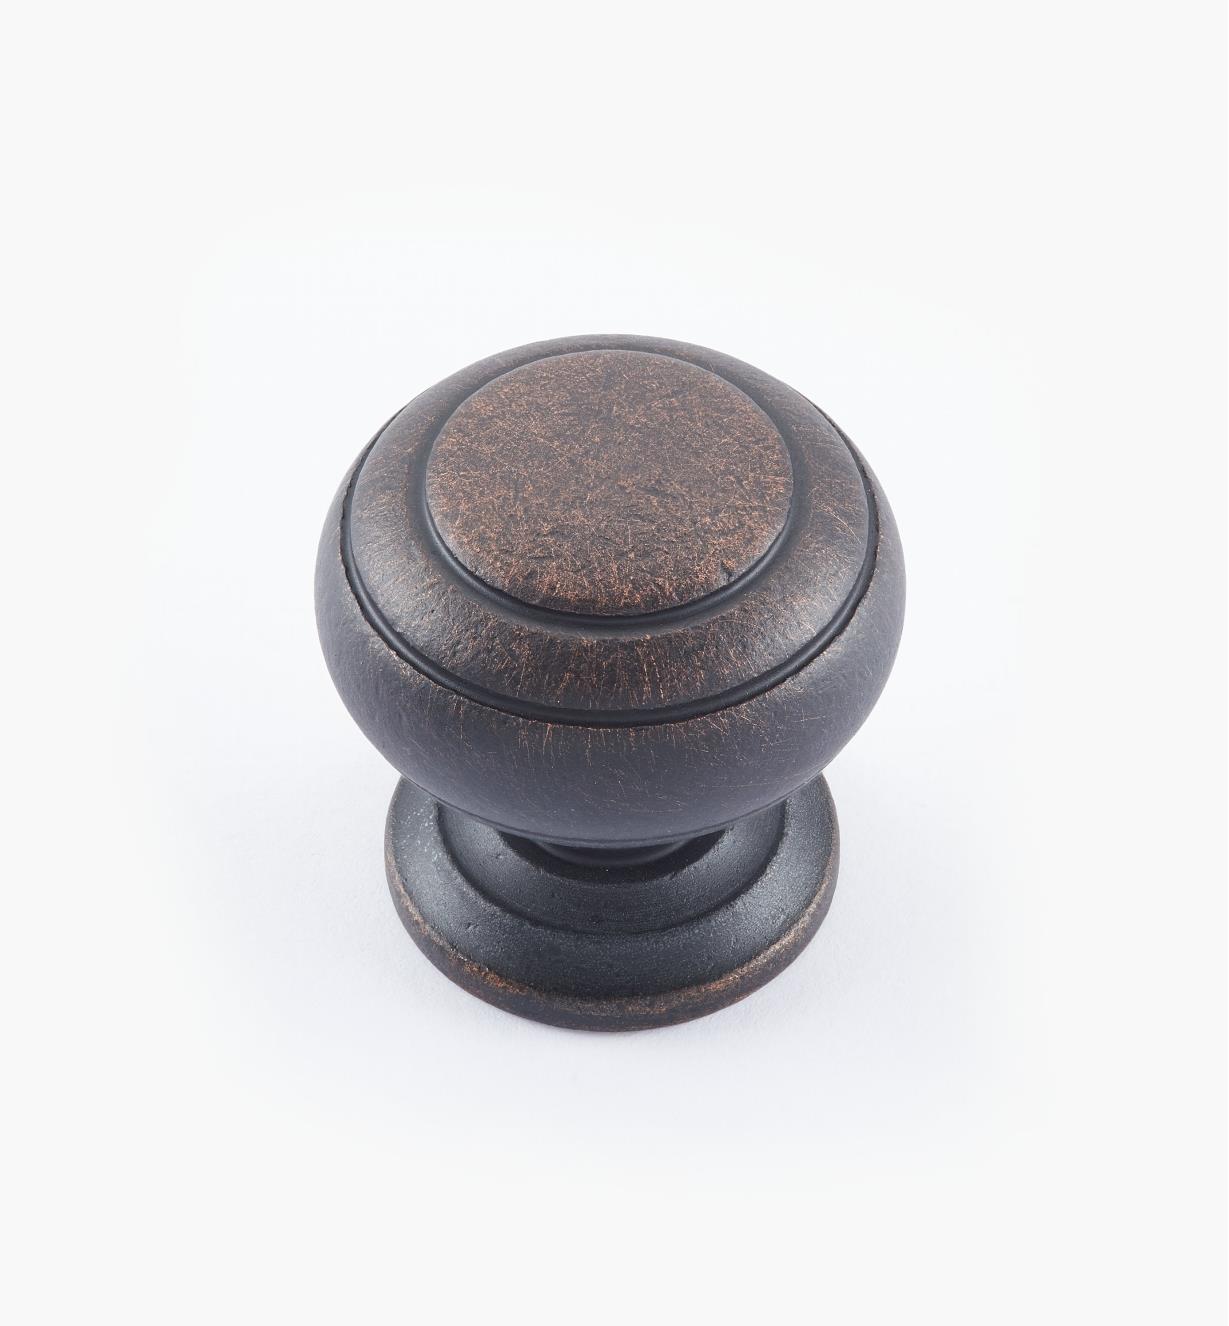 02W3266 - Weathered Bronze Suite - 1 1/4" x 1 1/4" Turned Brass Ring Knob